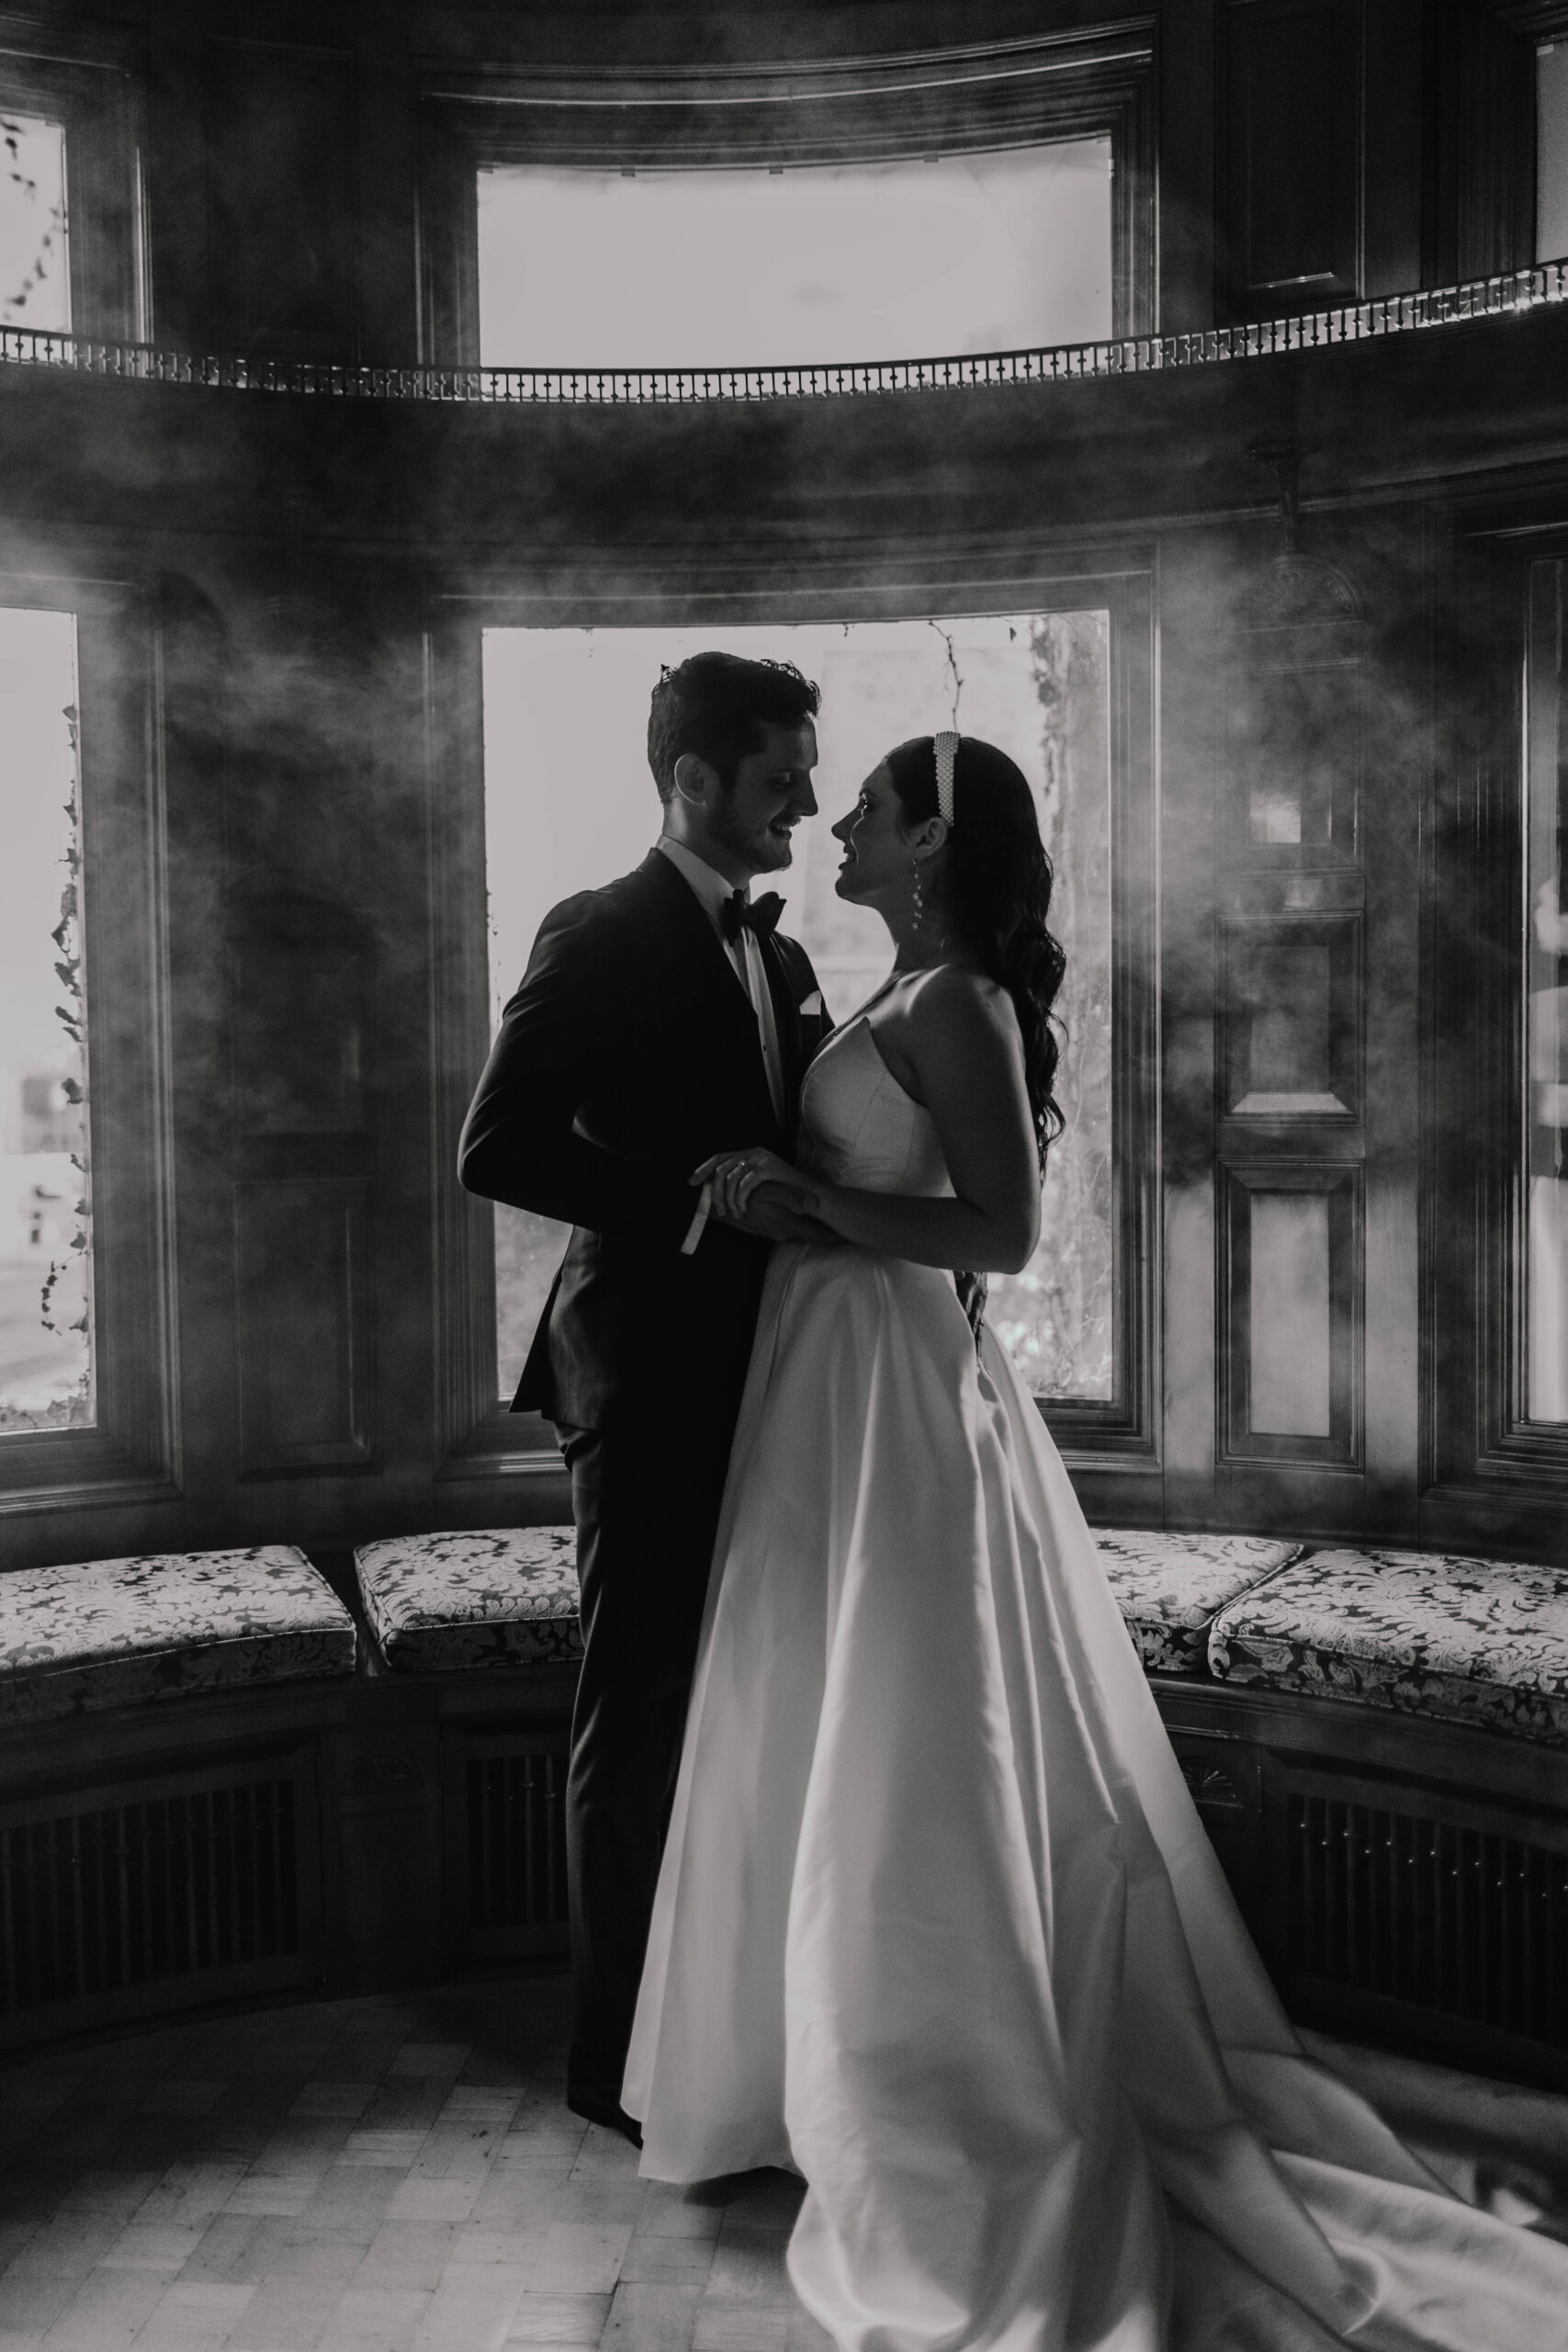 A Bride and Groom slow dancing in front of a big window with the sunlight shining throw illuminating the dust particles in the air from the vintage, old mansion they're standing in